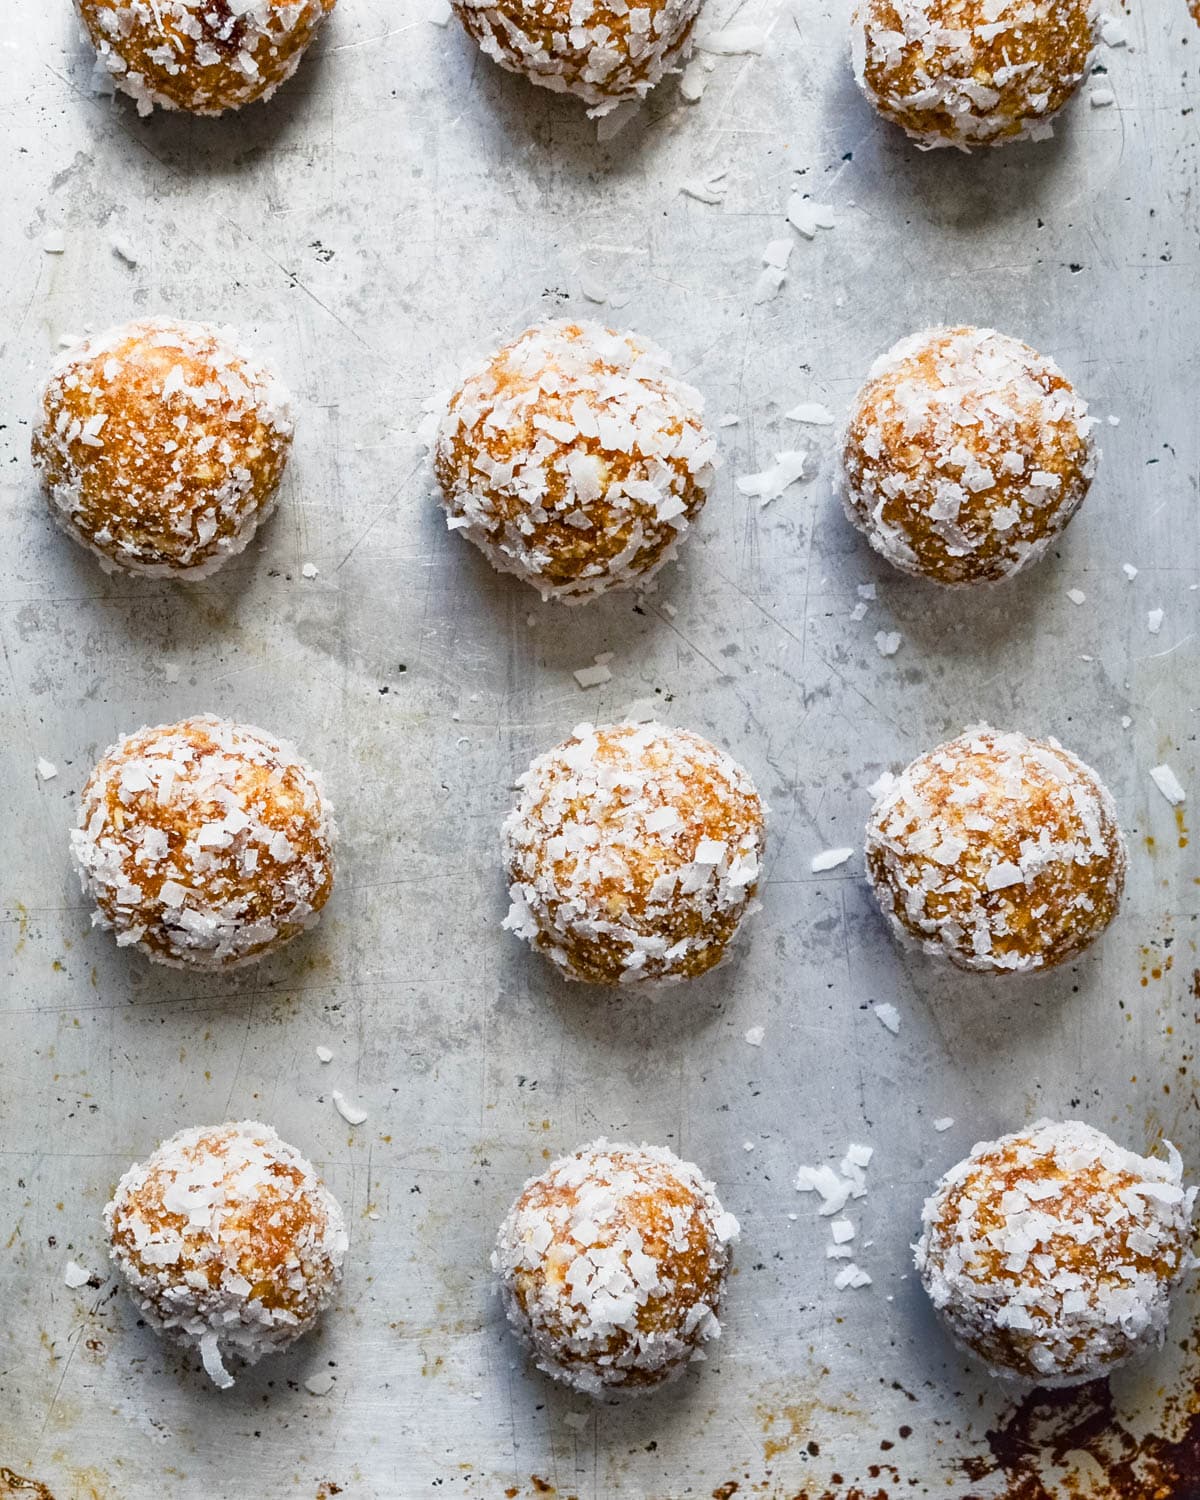 Coating the date nut balls with coconut.